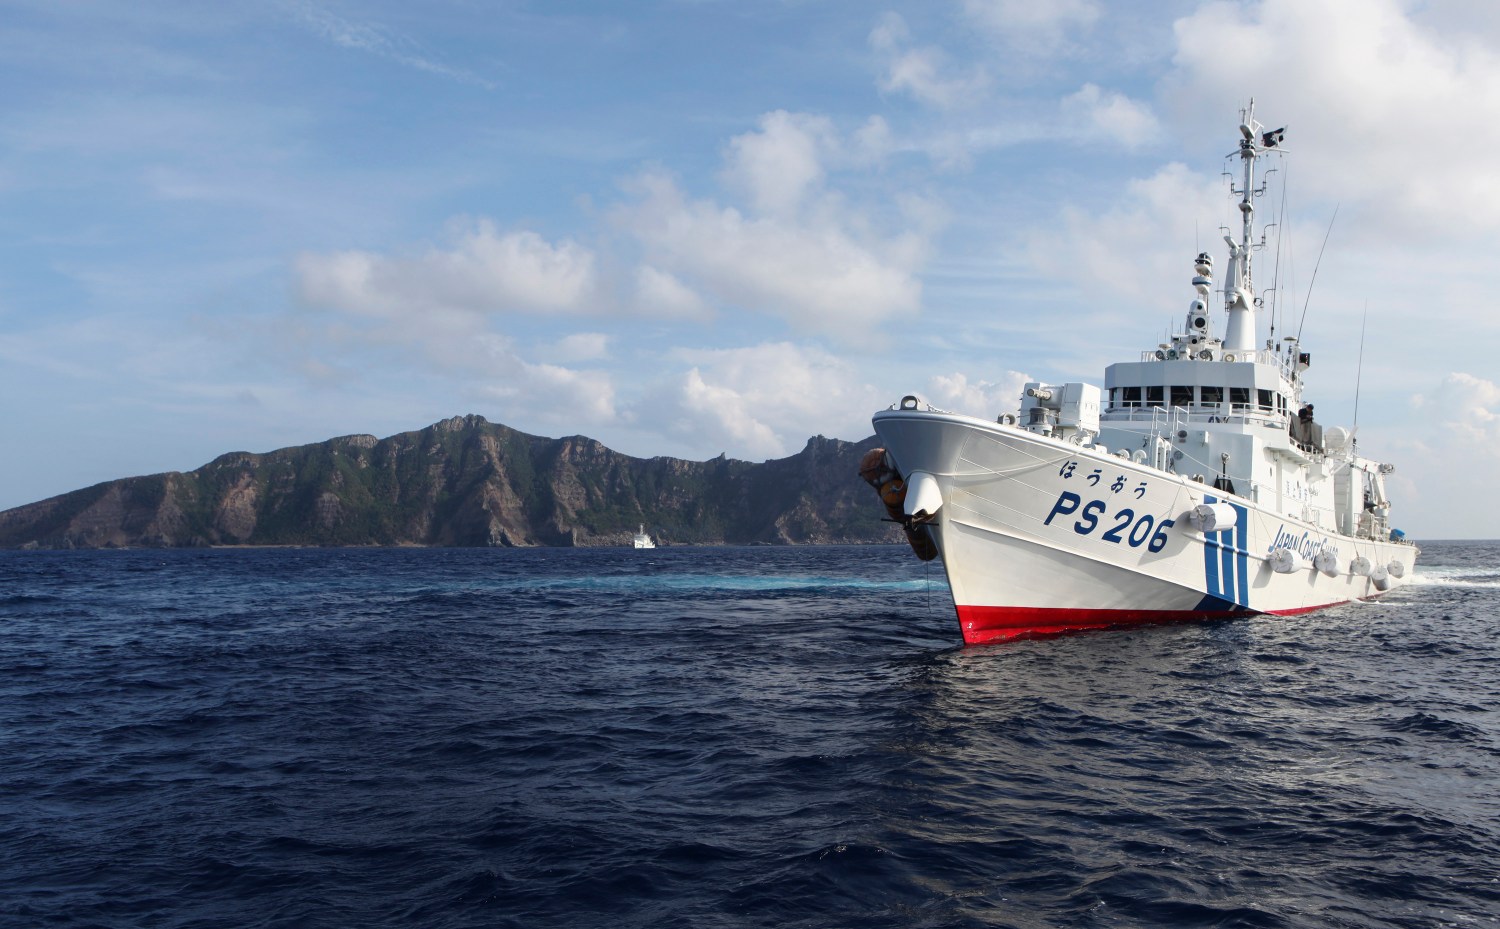 Japan Coast Guard vessel PS206 Houou sails in front of Uotsuri island, one of the disputed islands, called Senkaku in Japan and Diaoyu in China, in the East China Sea August 18, 2013. Boats carrying about 20 members of a Japanese nationalist group headed back to port on Sunday after sailing near tiny islands in the East China Sea that are at the centre of a dispute between Japan and China. The boats ships were surrounded by about 10 Japanese coast guard vessels when they approached within 1 nautical mile of the islands on Sunday morning. Coast guard crews in rubber boats urged them to leave through loudspeakers. REUTERS/Ruairidh Villar (JAPAN - Tags: MARITIME POLITICS) - GM1E98I1MSV01